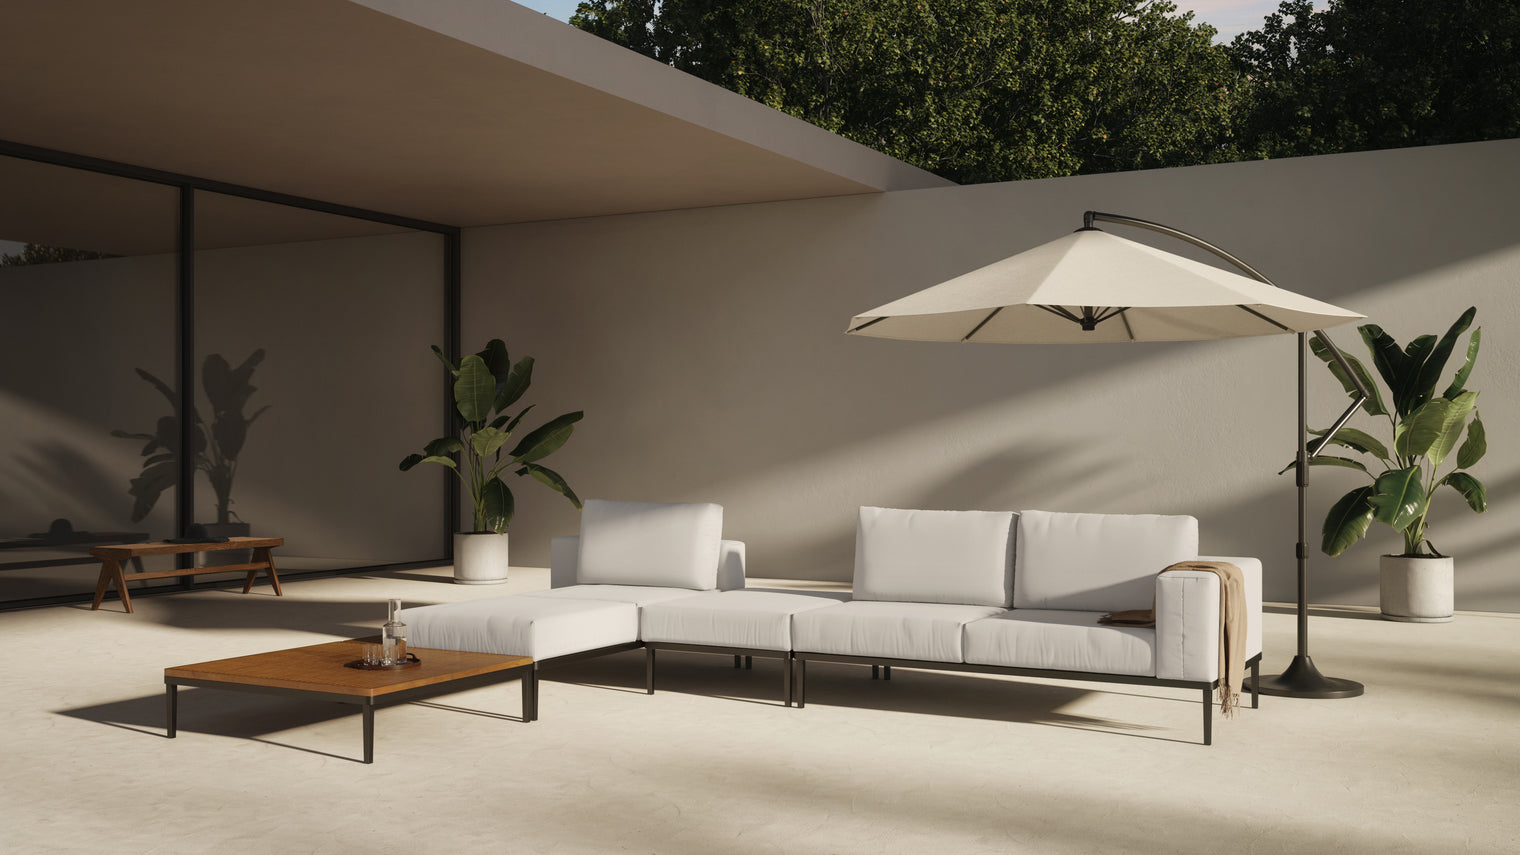 Outdoor Opulence | Whether you're lounging in solitude or hosting a gathering with loved ones, the Marcus Collection sets the stage for unforgettable outdoor moments. Immerse yourself in luxury and style with the Marcus Collection, where outdoor living reaches new heights of sophistication.
